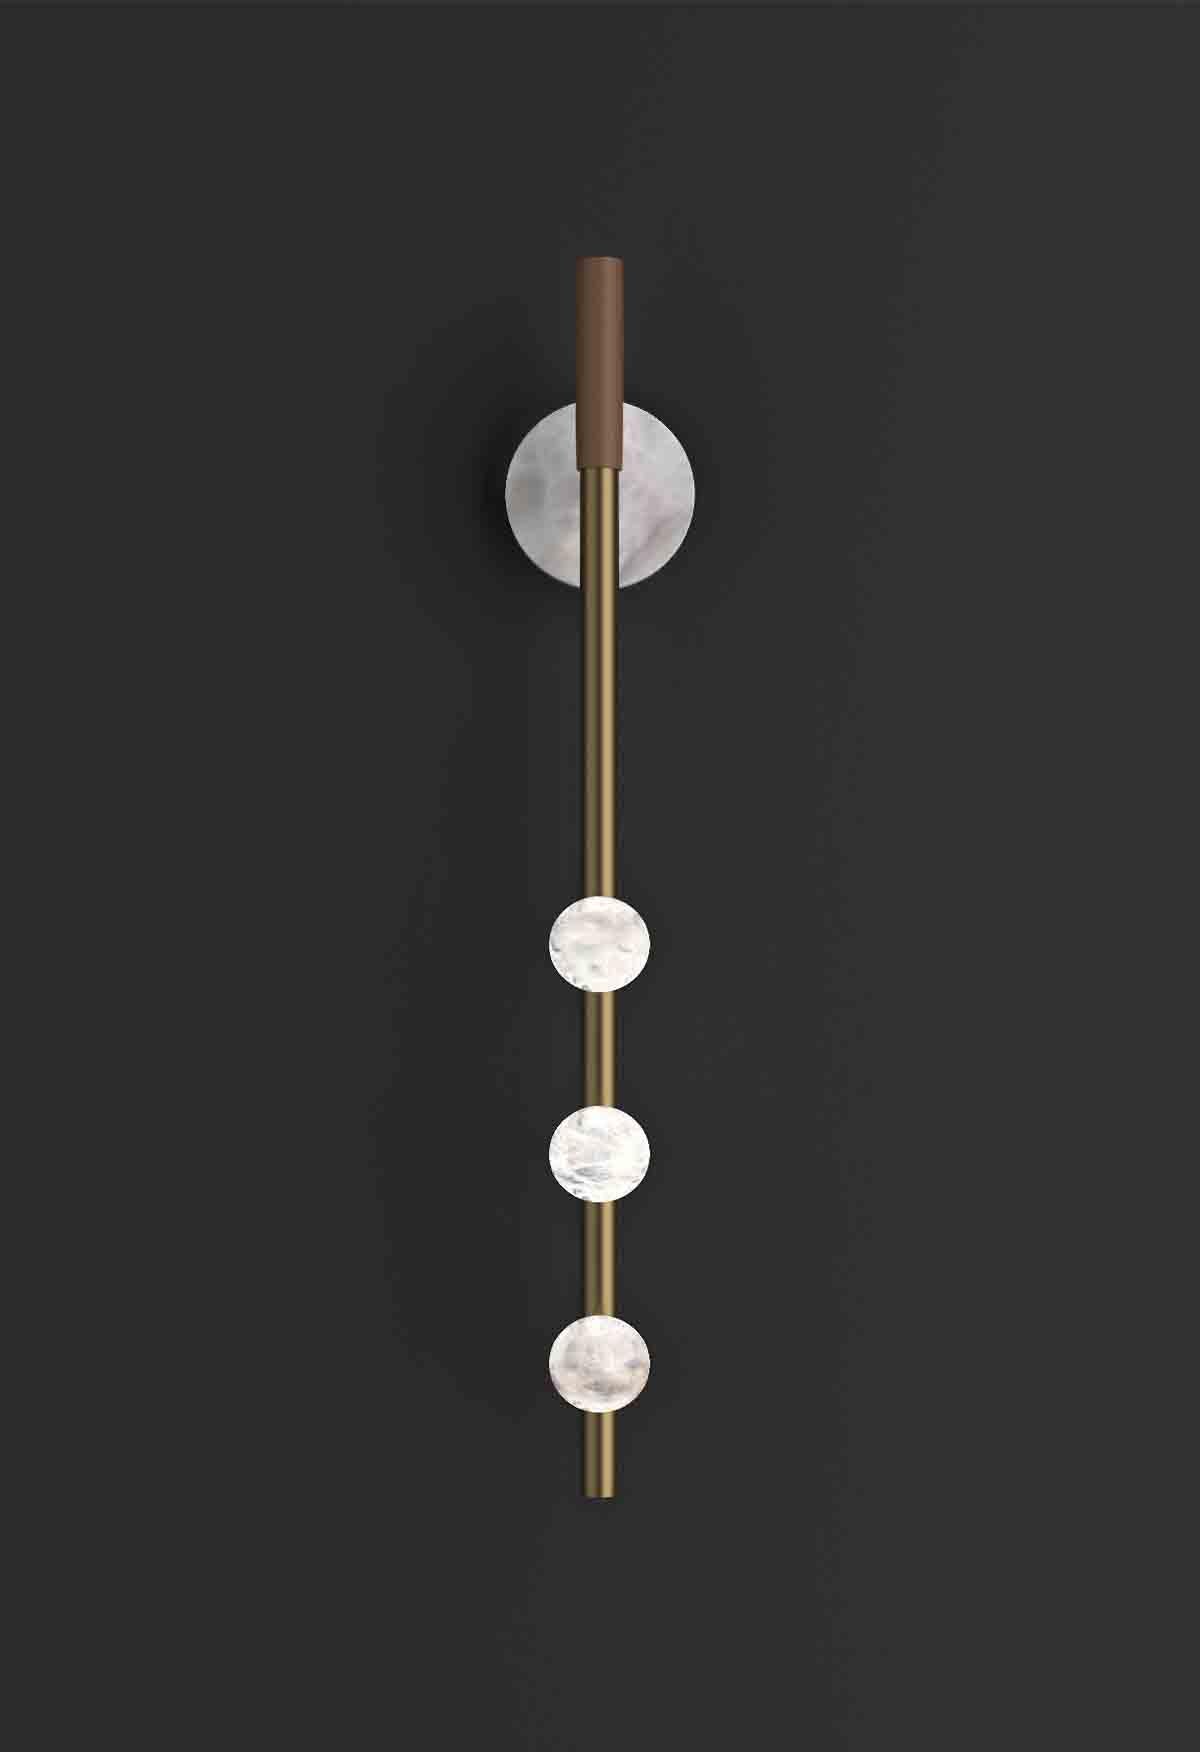 Demetra Bronze Wall Lamp by Alabastro Italiano
Dimensions: D 9 x W 10 x H 60 cm.
Materials: White alabaster, bronze and leather.

Available in different finishes: Shiny Silver, Bronze, Brushed Brass, Ruggine of Florence, Brushed Burnished, Shiny